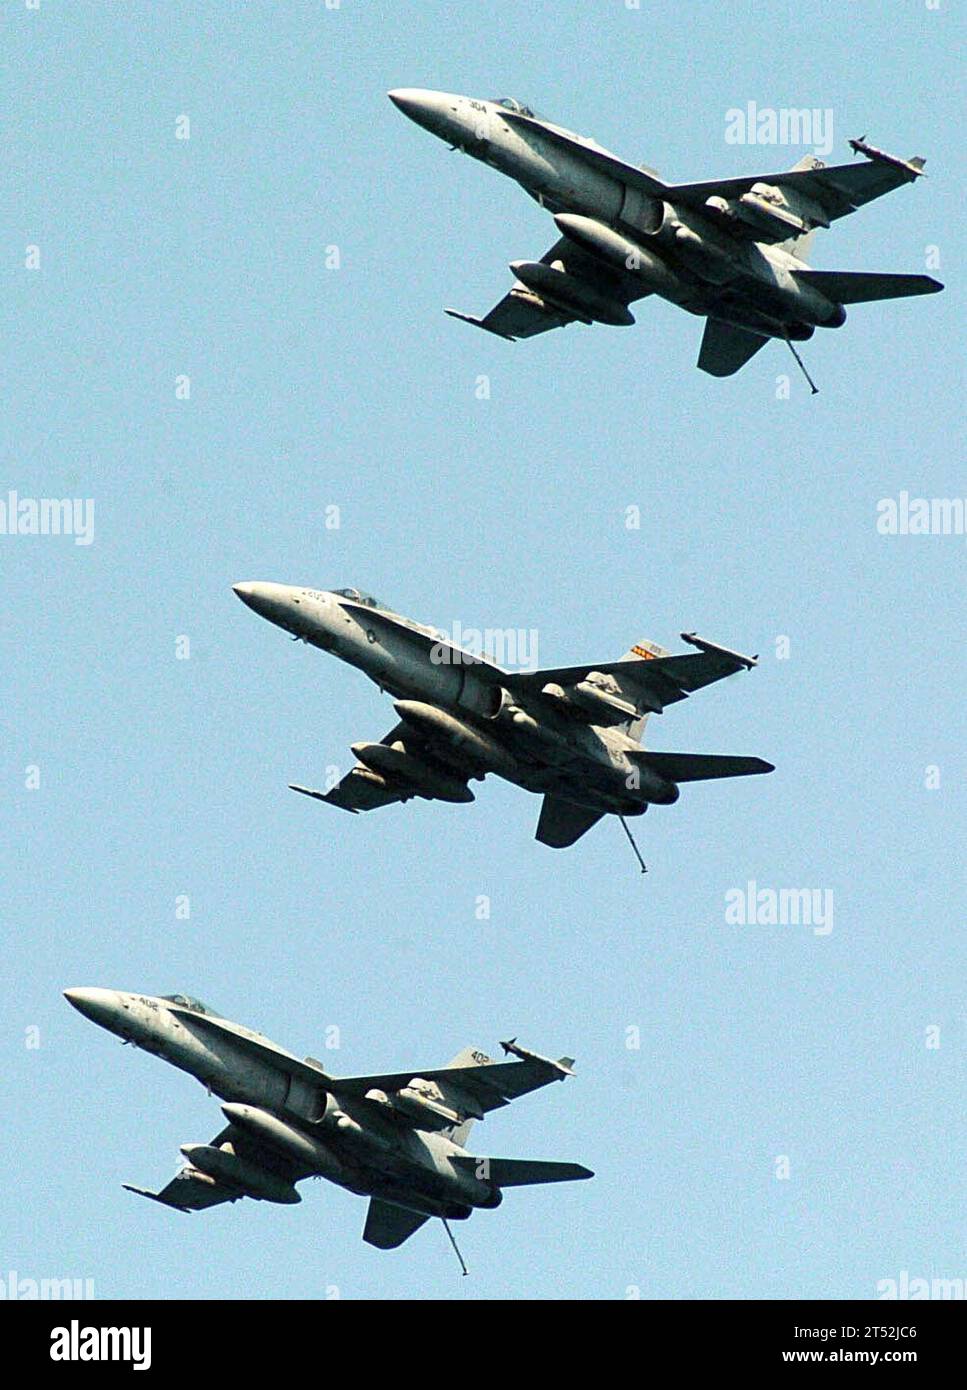 0707043038W-196  PERSIAN GULF (July 4, 2007) - Three F/A-18C Hornets from three different squadrons assigned to Carrier Air Wing 9 fly in formation above Nimitz-class aircraft carrier USS John C. Stennis (CVN 74). Stennis and Carrier Air Wing 9 are on a scheduled deployment in support of the global war on terrorism and maritime operations. Maritime operations help set the conditions for security and stability in the maritime environment, as well as complement counter-terrorism and security efforts of regional nations. U.S. Navy Stock Photo